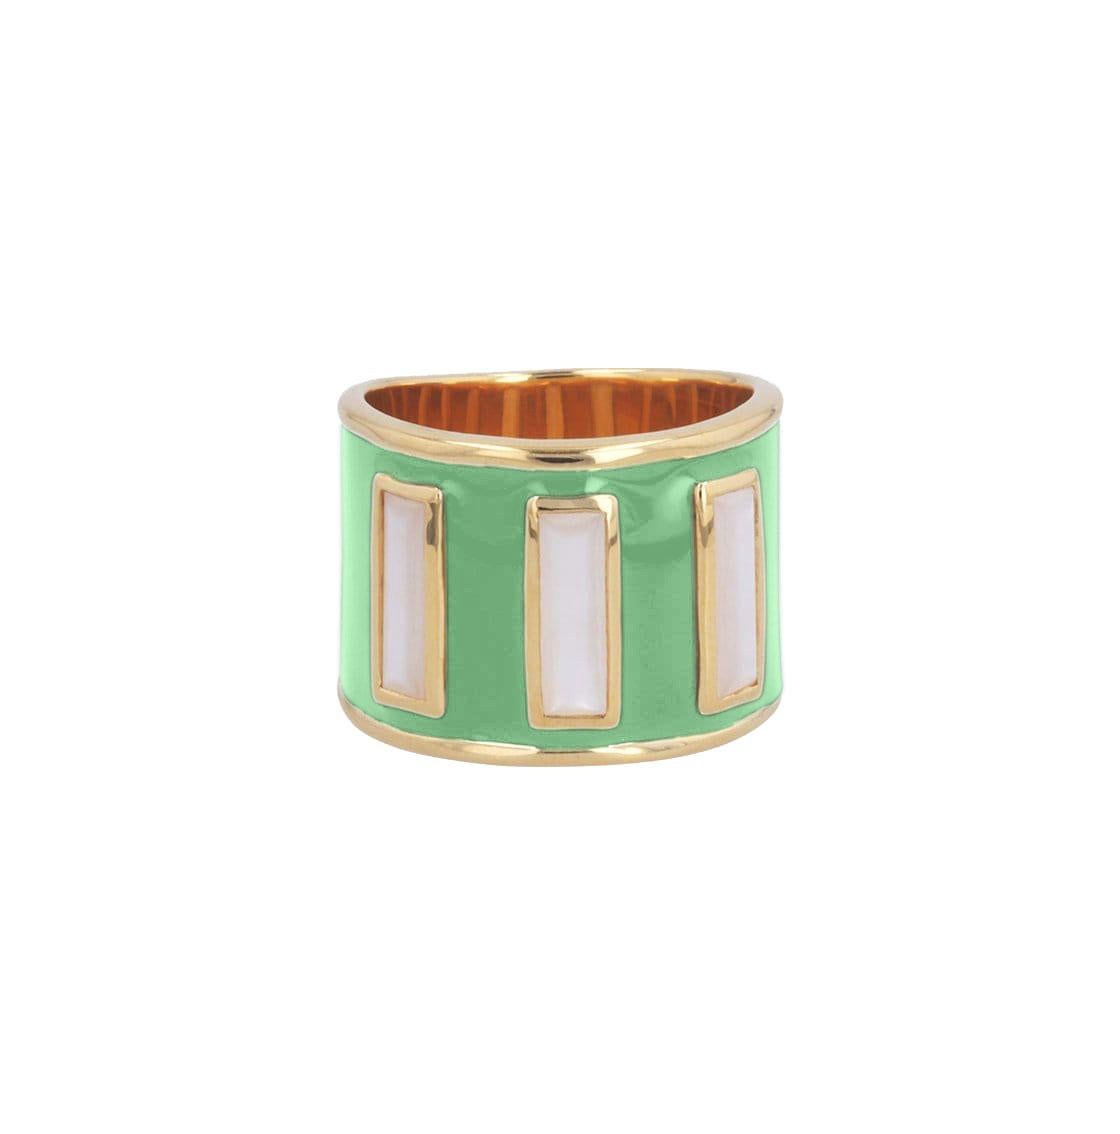 Limited Edition Gigi Enamel Ring in New Colors with Mother of Pearl For Sale 2